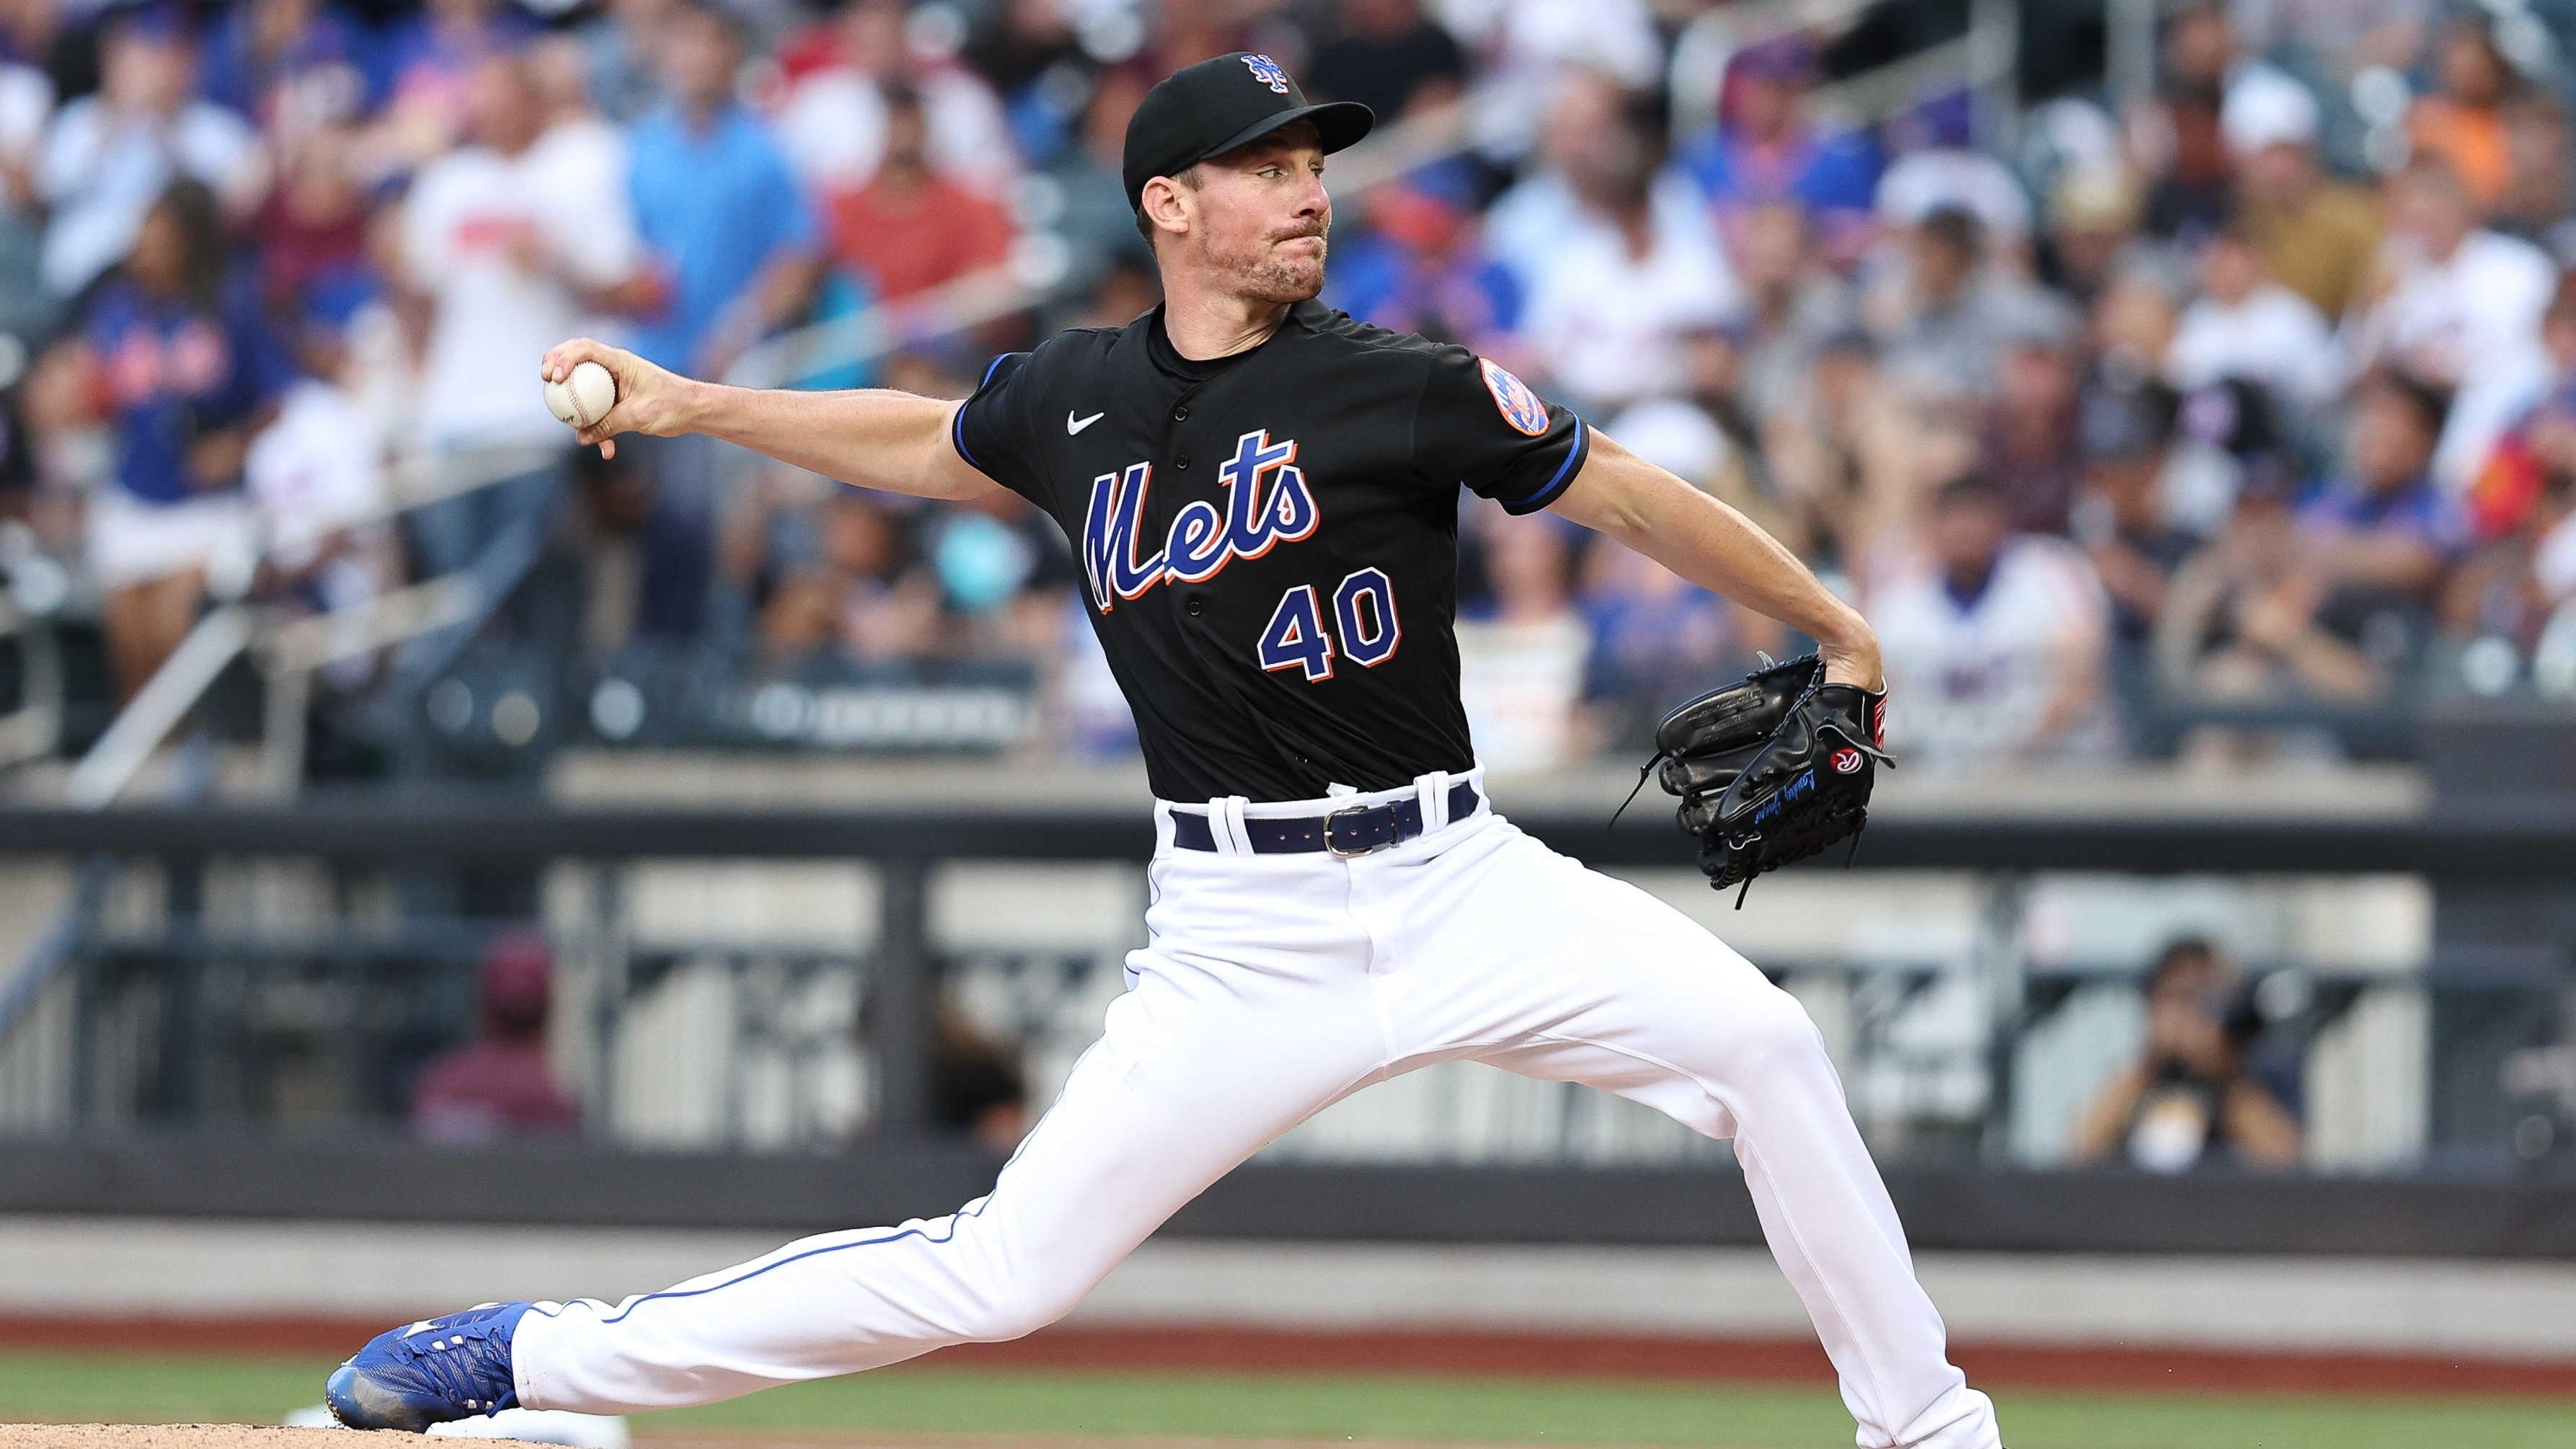 Jul 8, 2022; New York City, New York, USA; New York Mets starting pitcher Chris Bassitt (40) delivers a pitch during the first inning against the Miami Marlins at Citi Field. / Vincent Carchietta-USA TODAY Sports